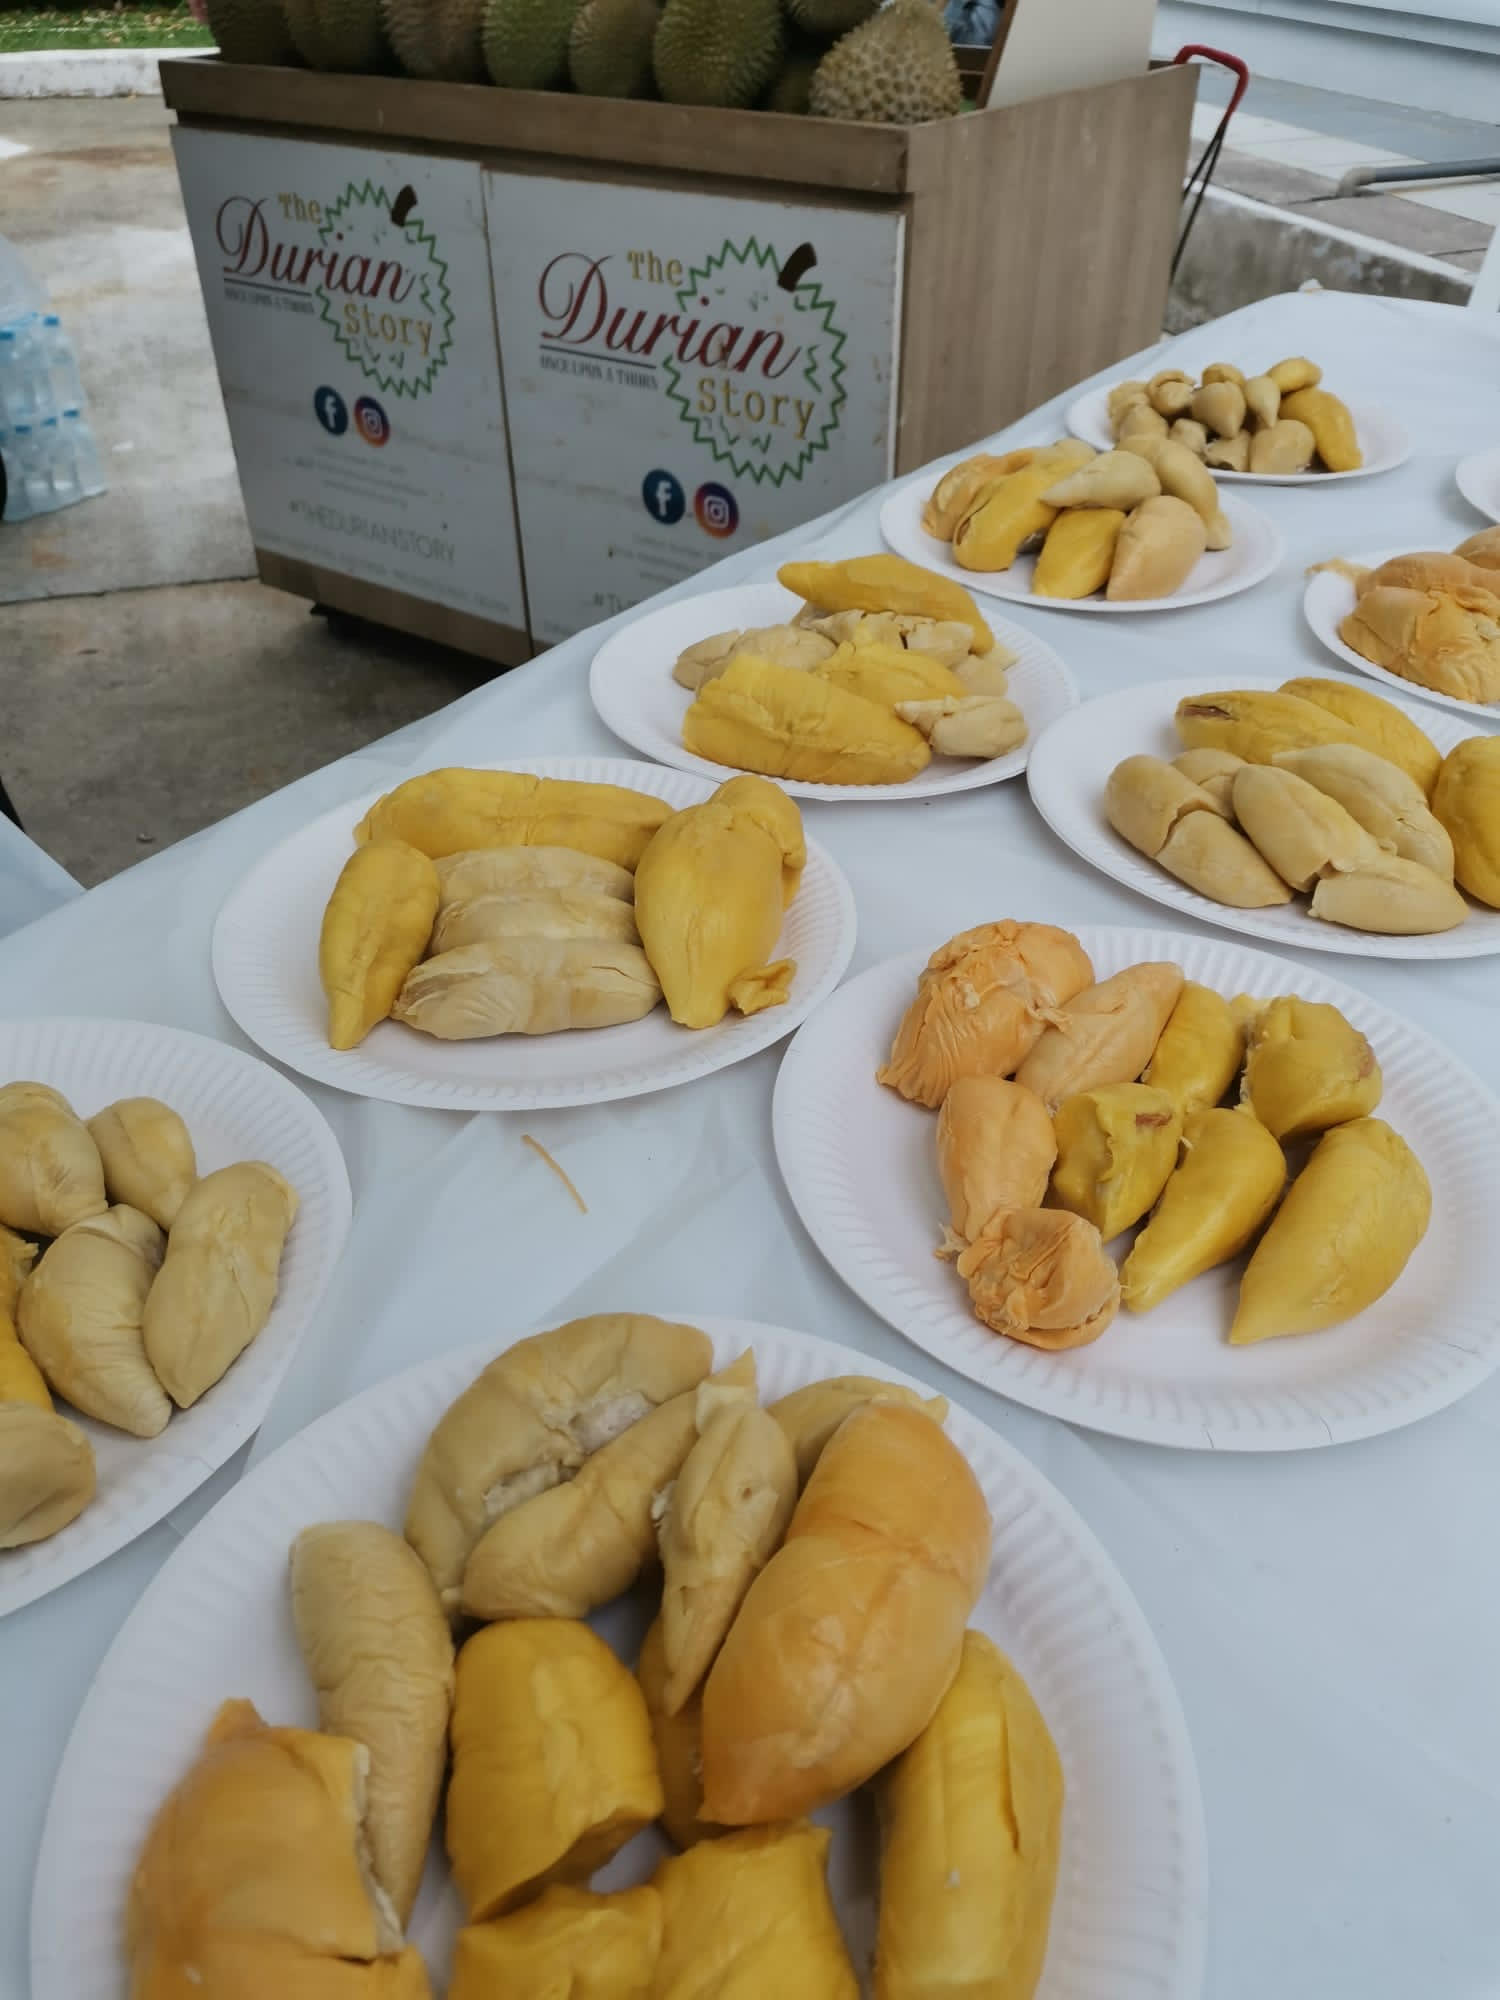 Corporate Durian Party with LG